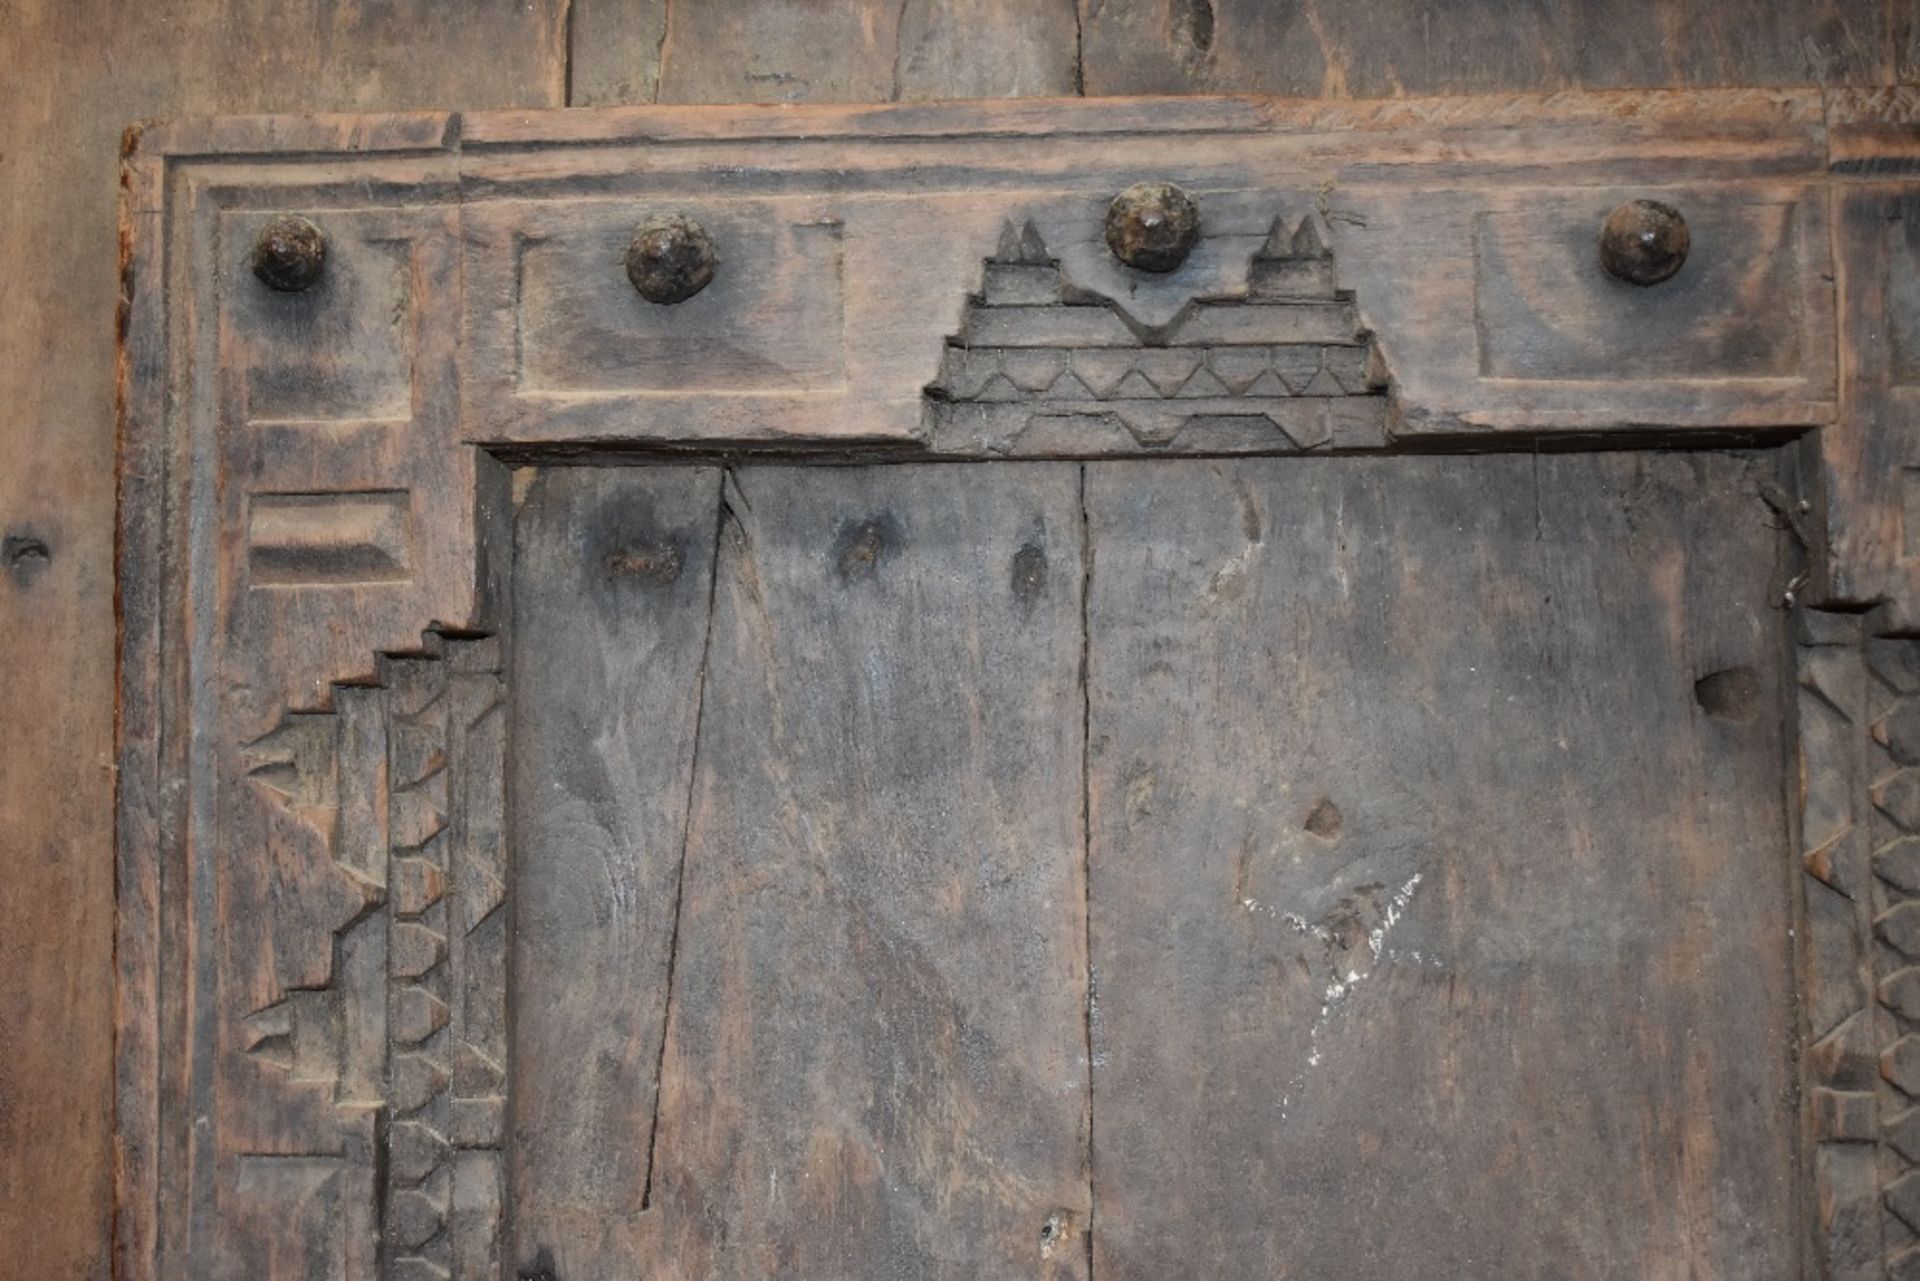 A pair of impressive 18th century teak and iron doors, possibly Spanish Colonial - Image 3 of 10